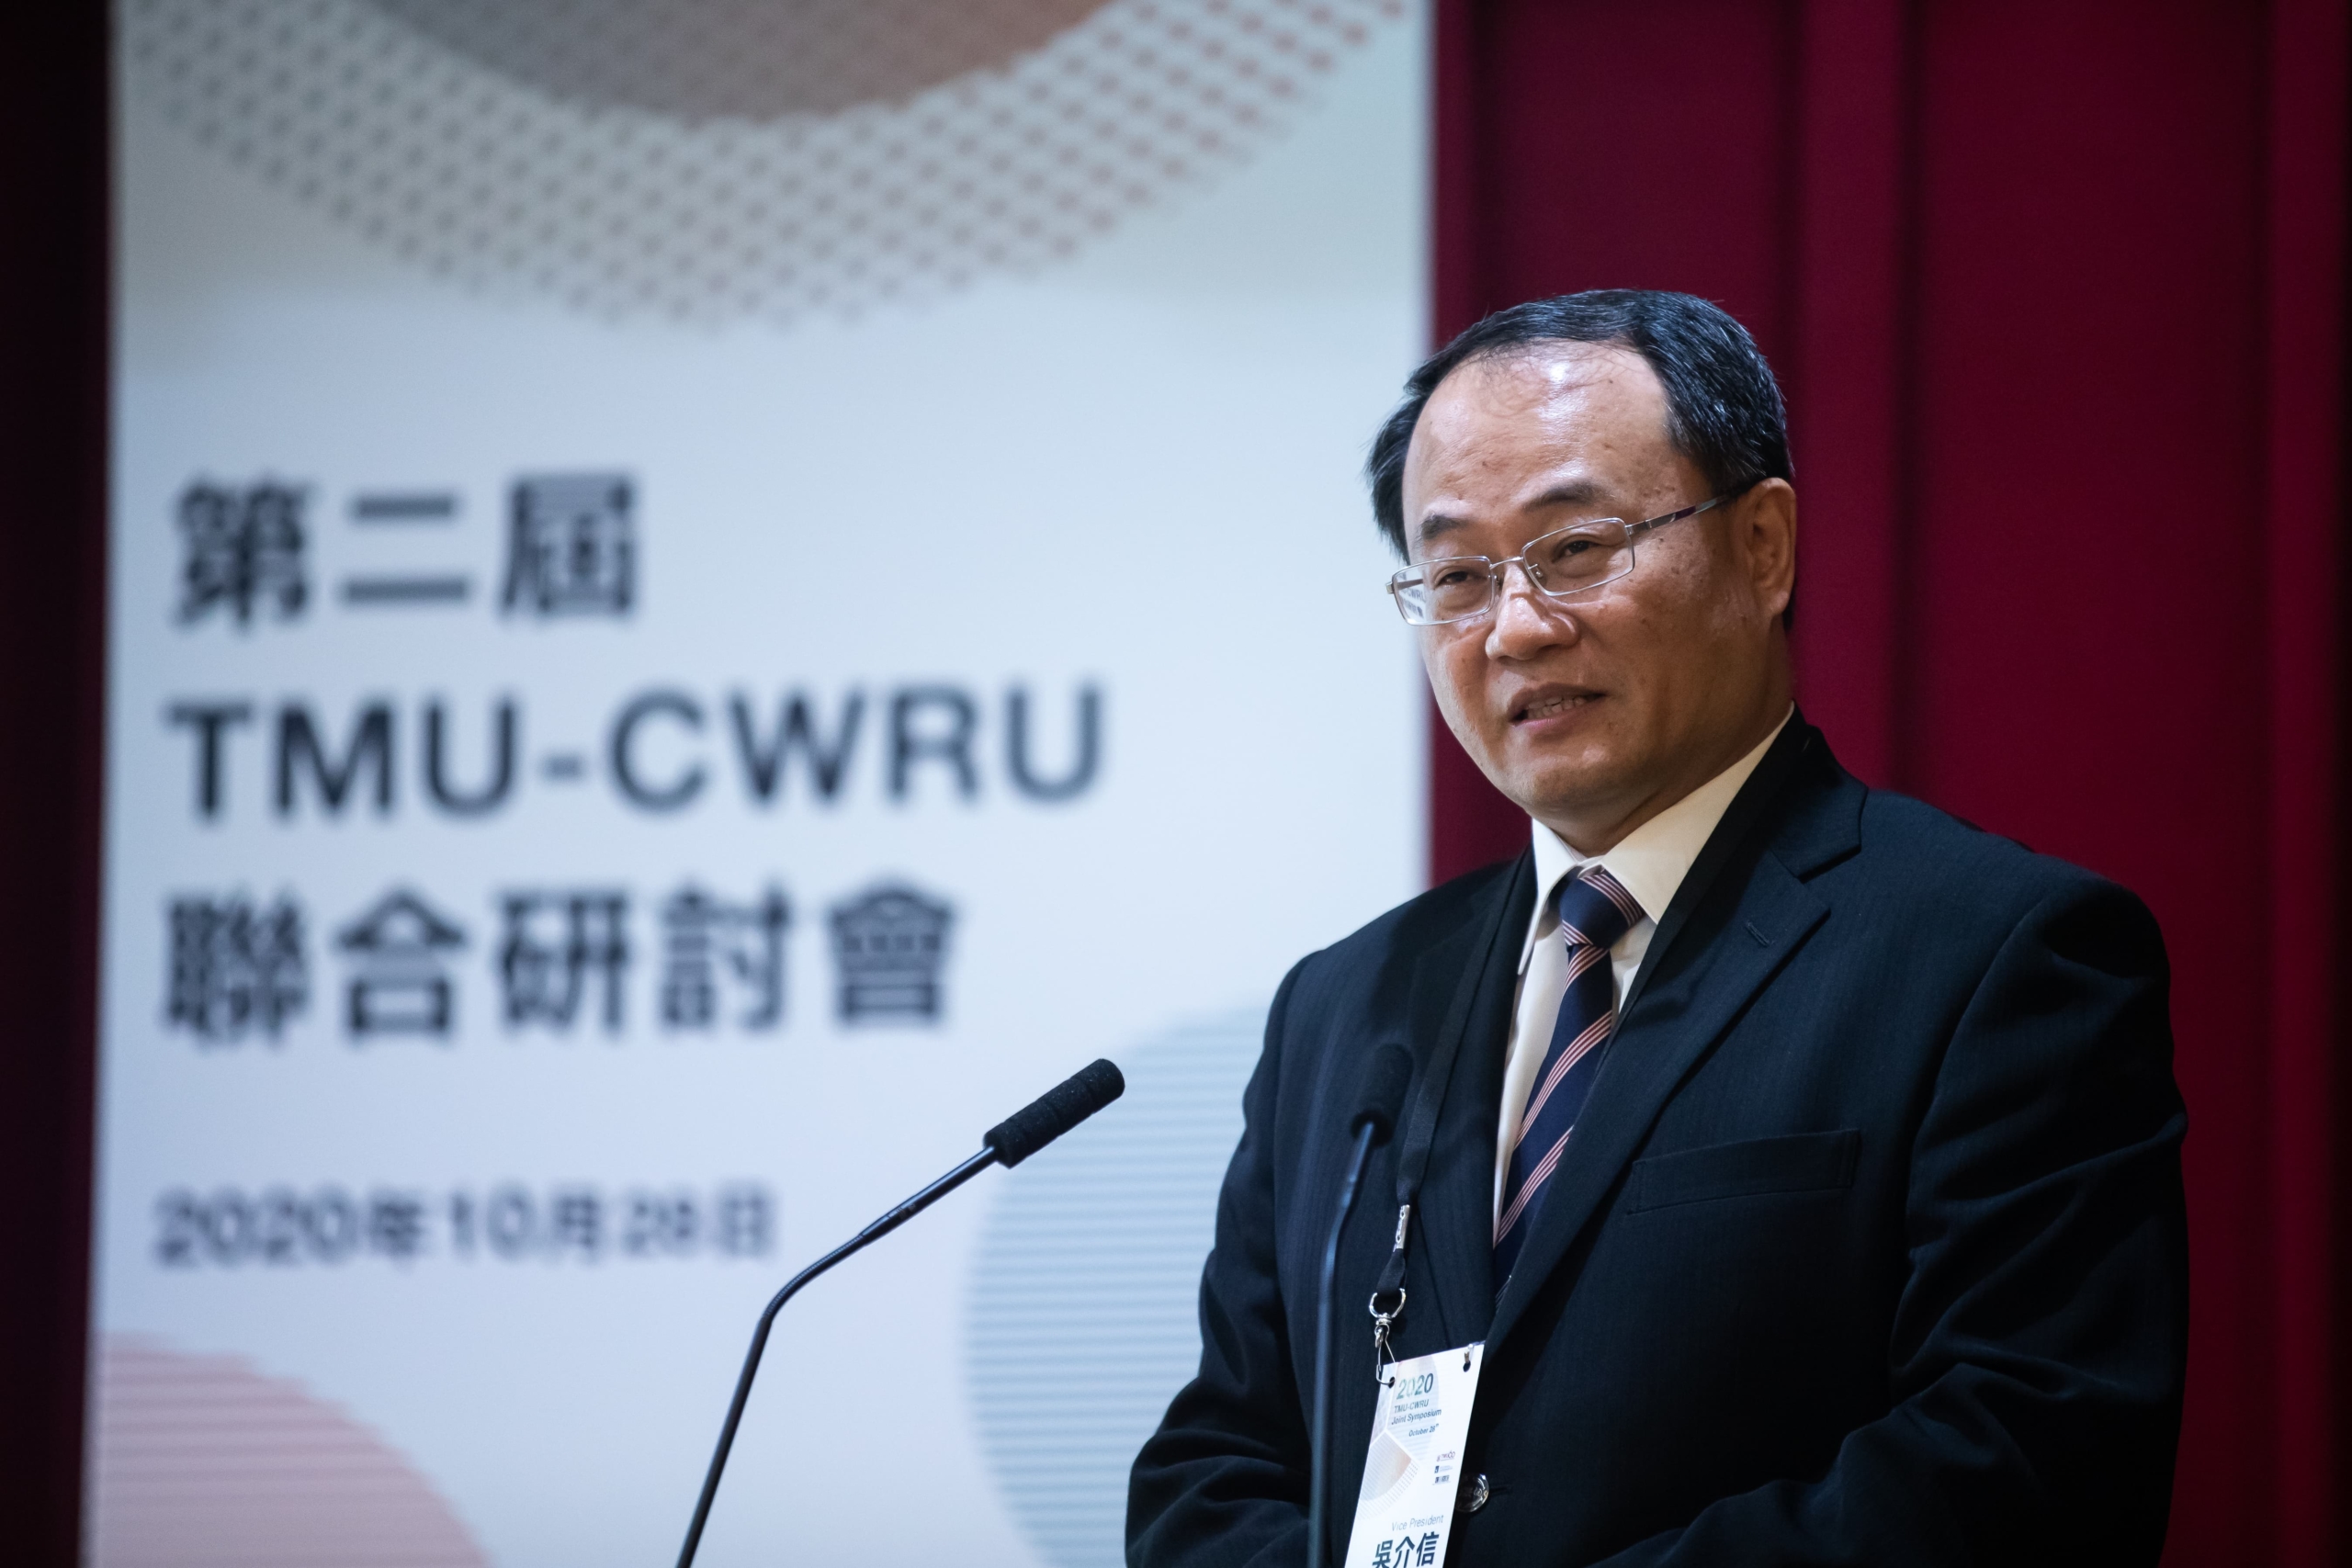 TMU Vice President Chieh-Hsi Wu delivers the opening remarks of the symposium